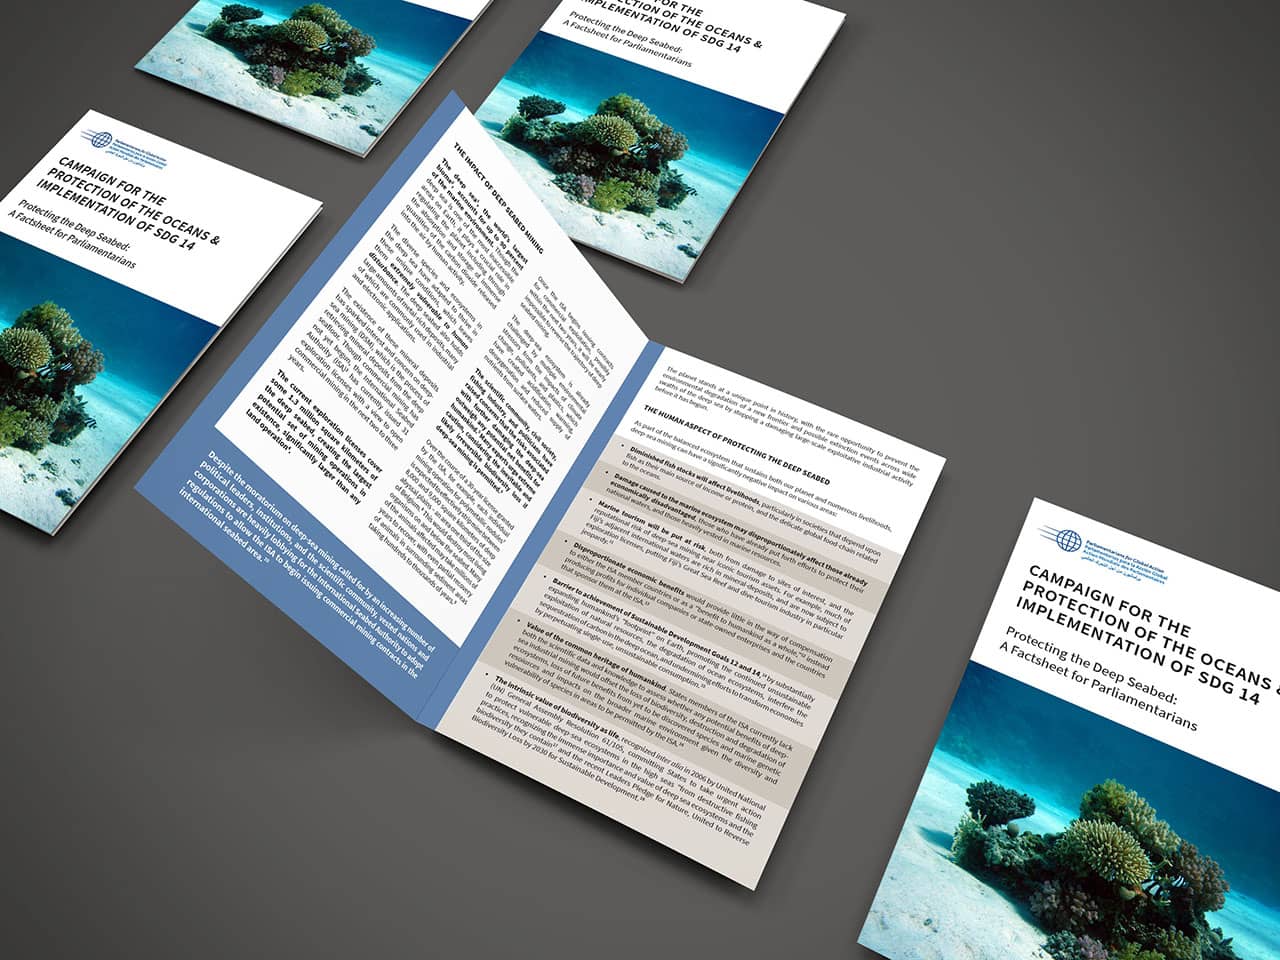 Factsheet for Parliamentarians: Protecting the Deep Seabed